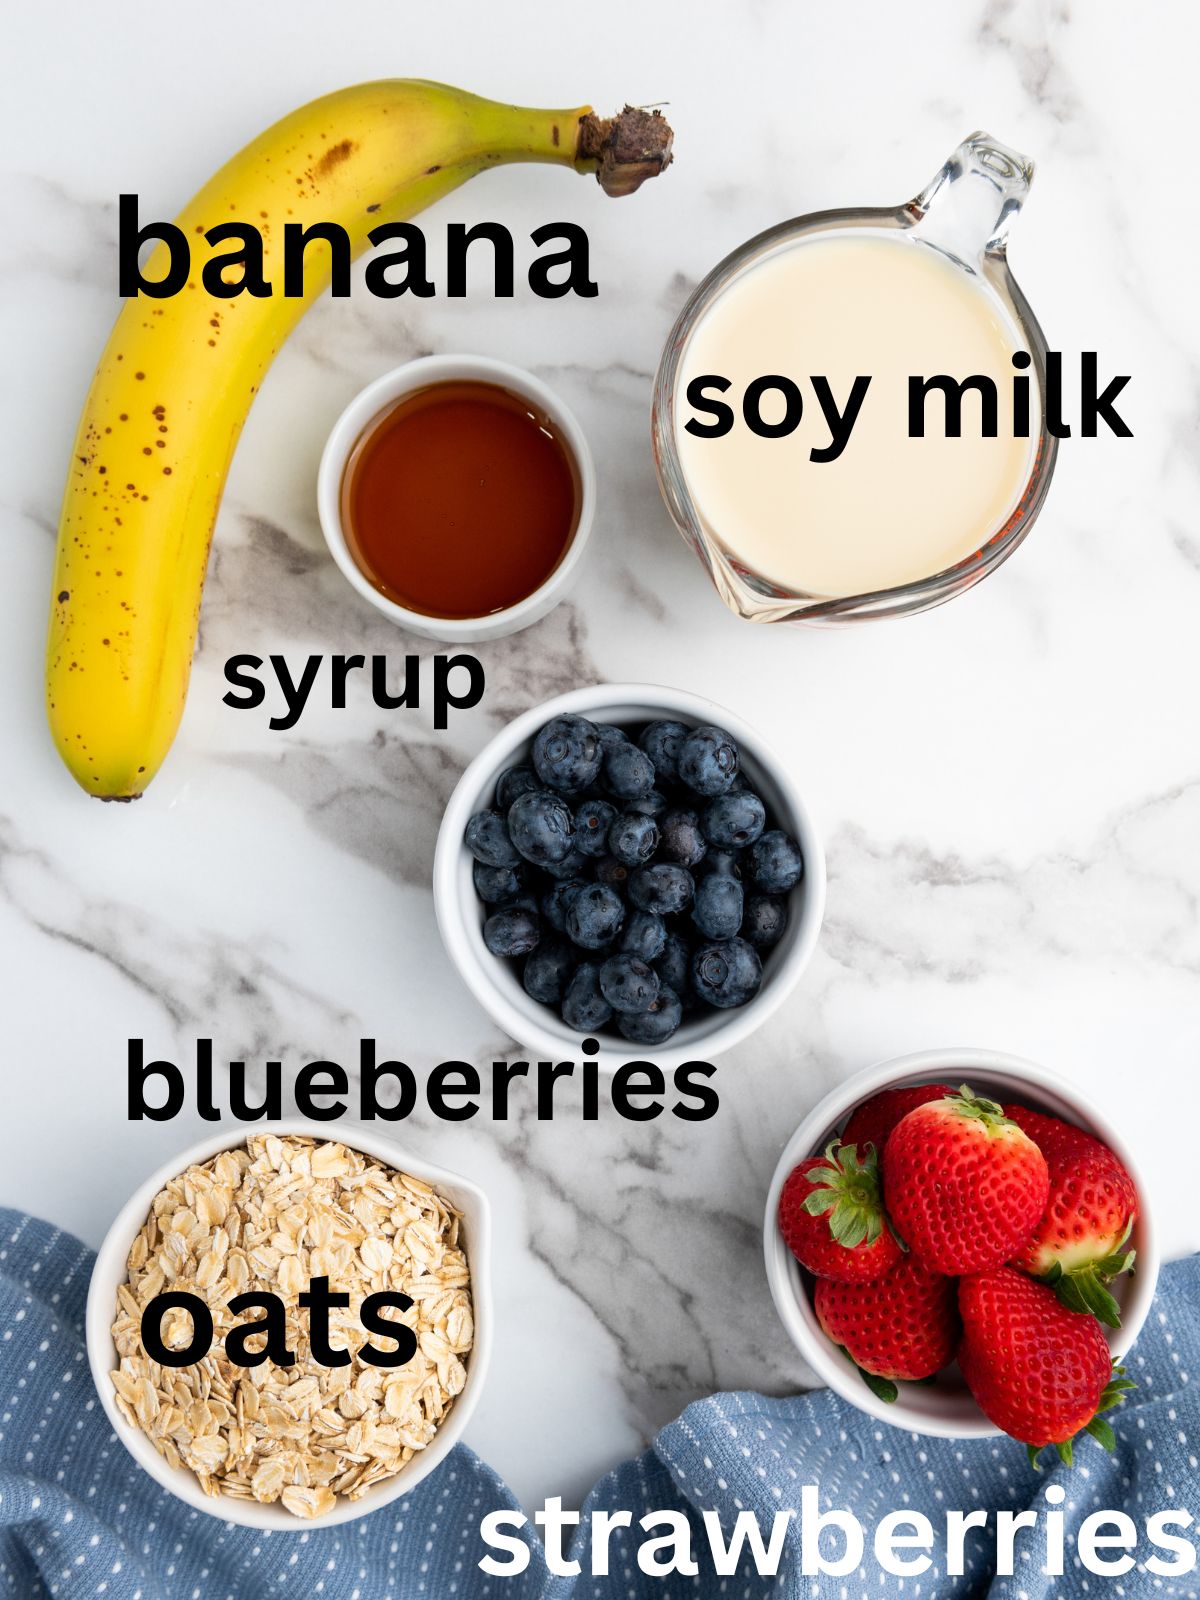 Vanilla overnight oats ingredients laid out on a kitchen counter: banana, soy milk, syrup, blueberries, oats, strawberries.